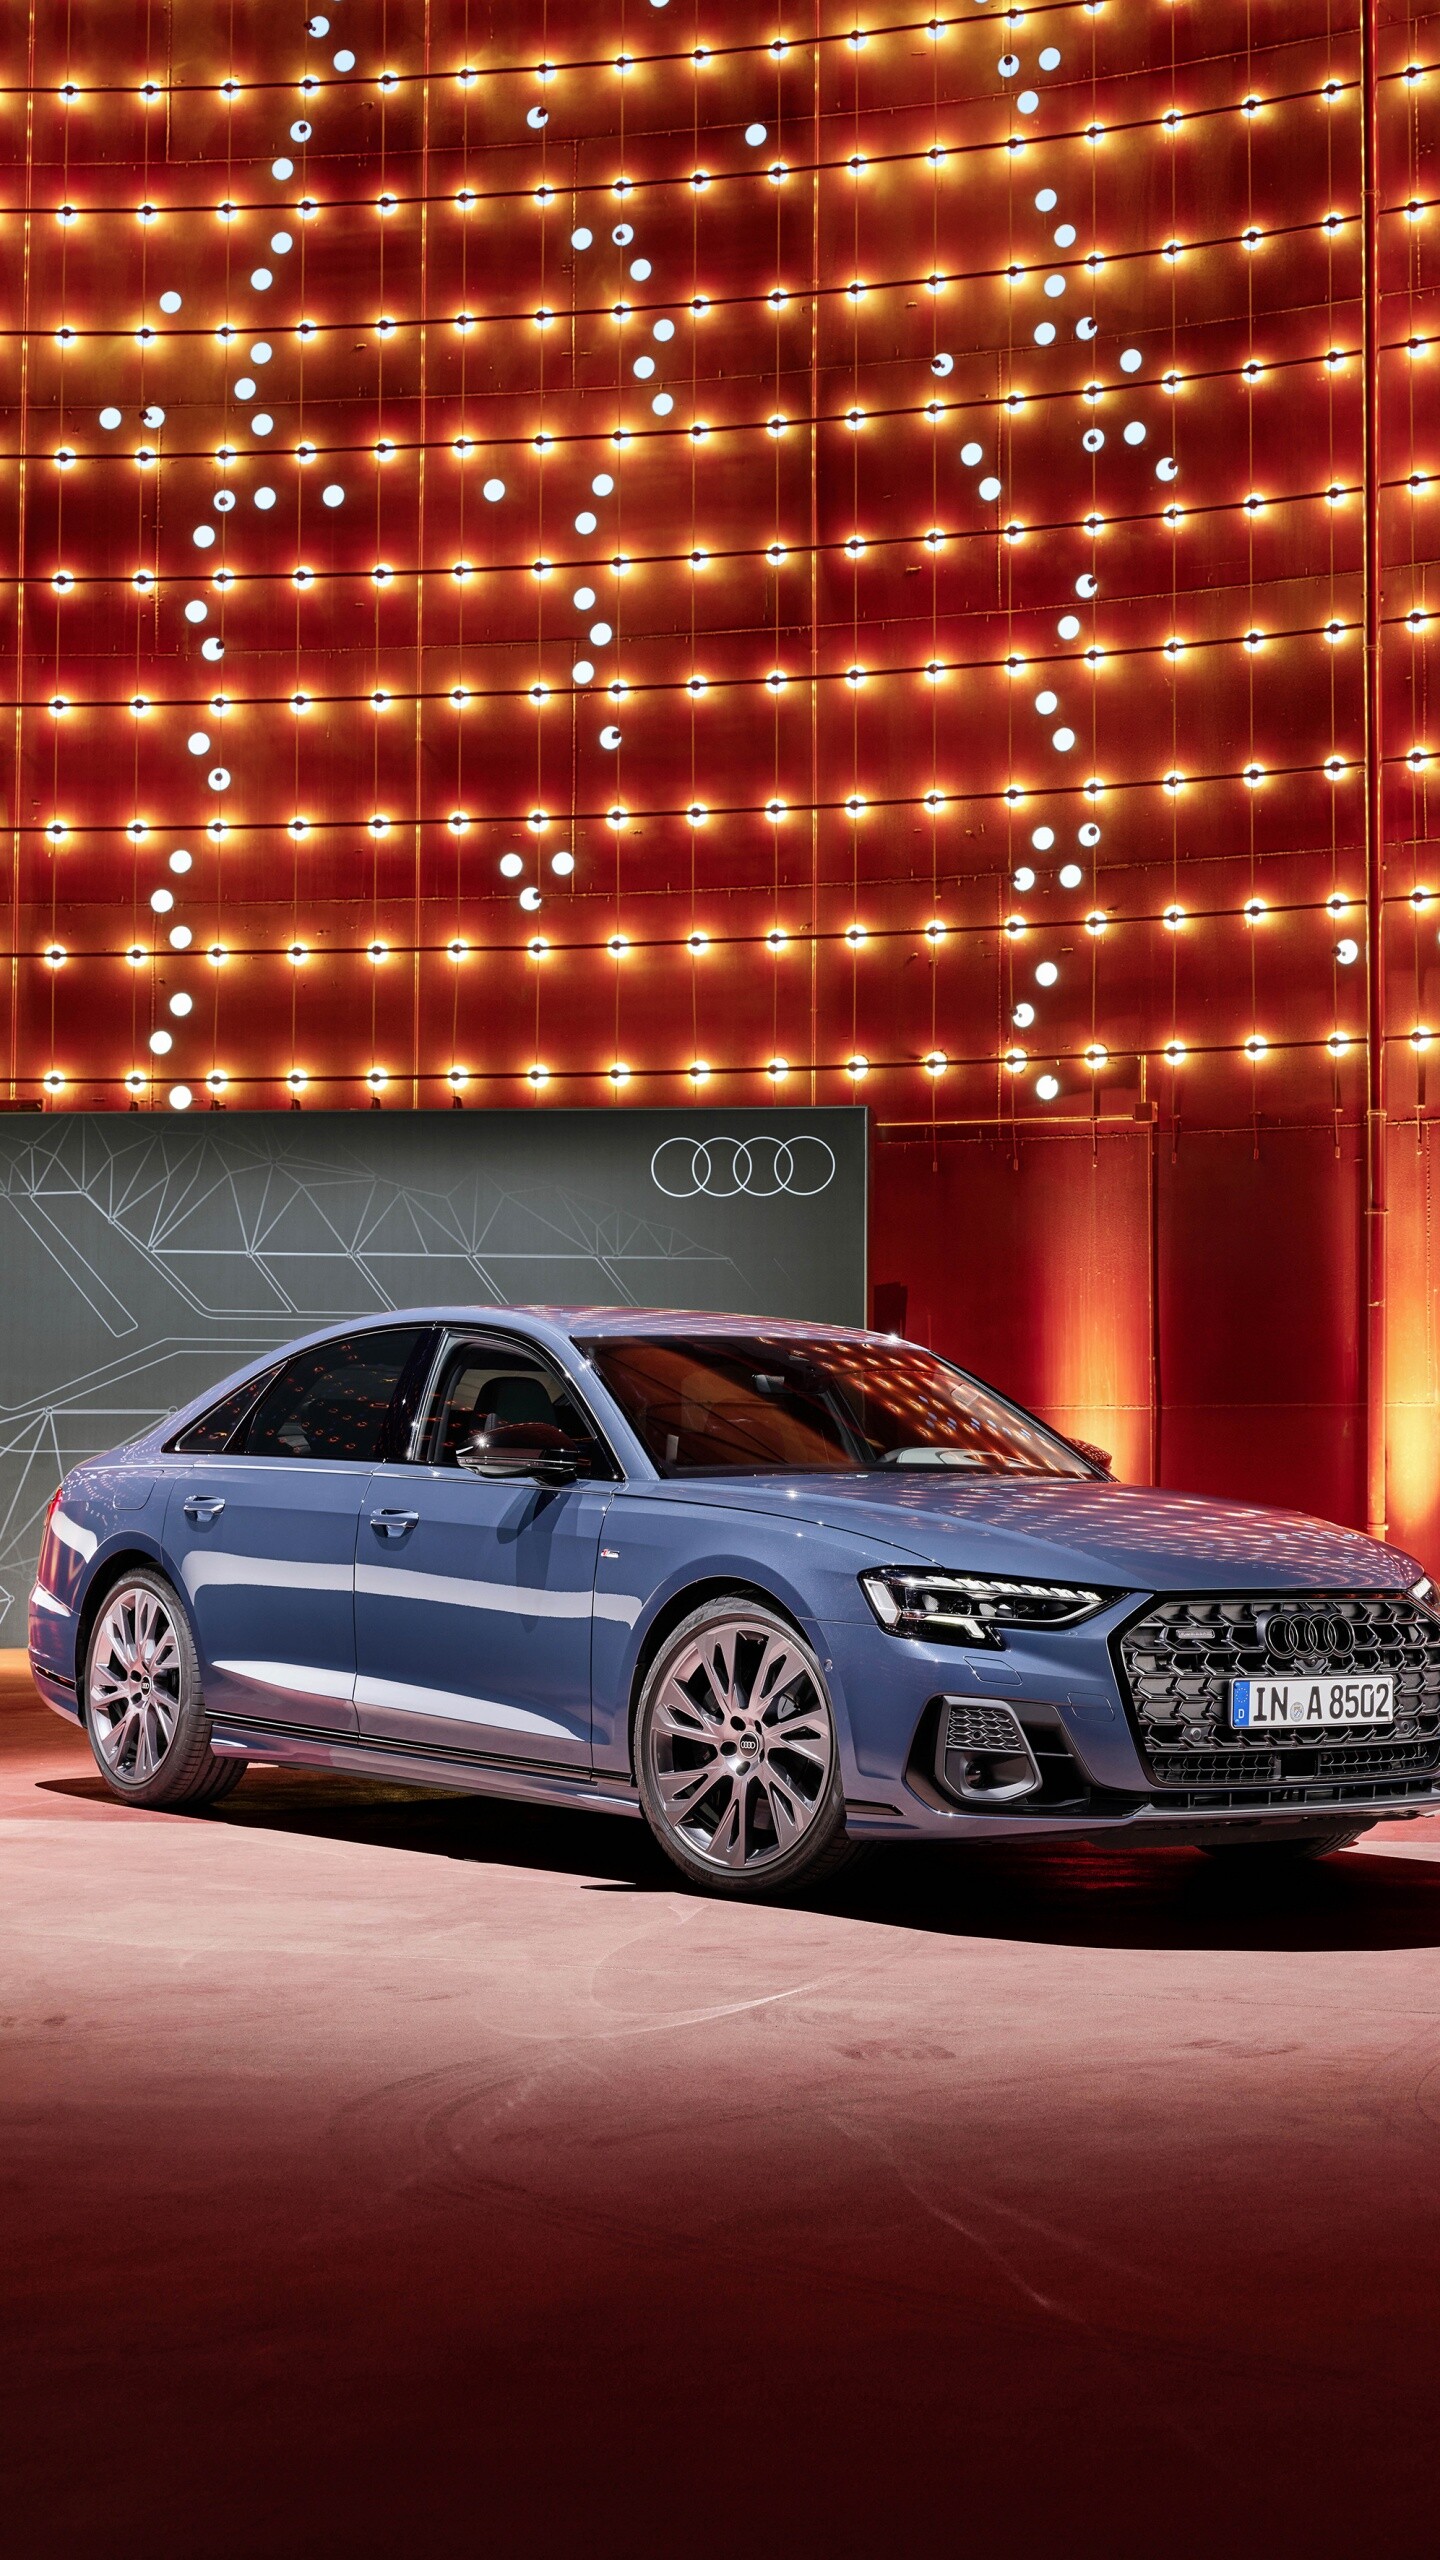 Audi A8: Audi's flagship sedan, Features a smooth, powerful turbocharged V6, Quattro S line. 1440x2560 HD Background.